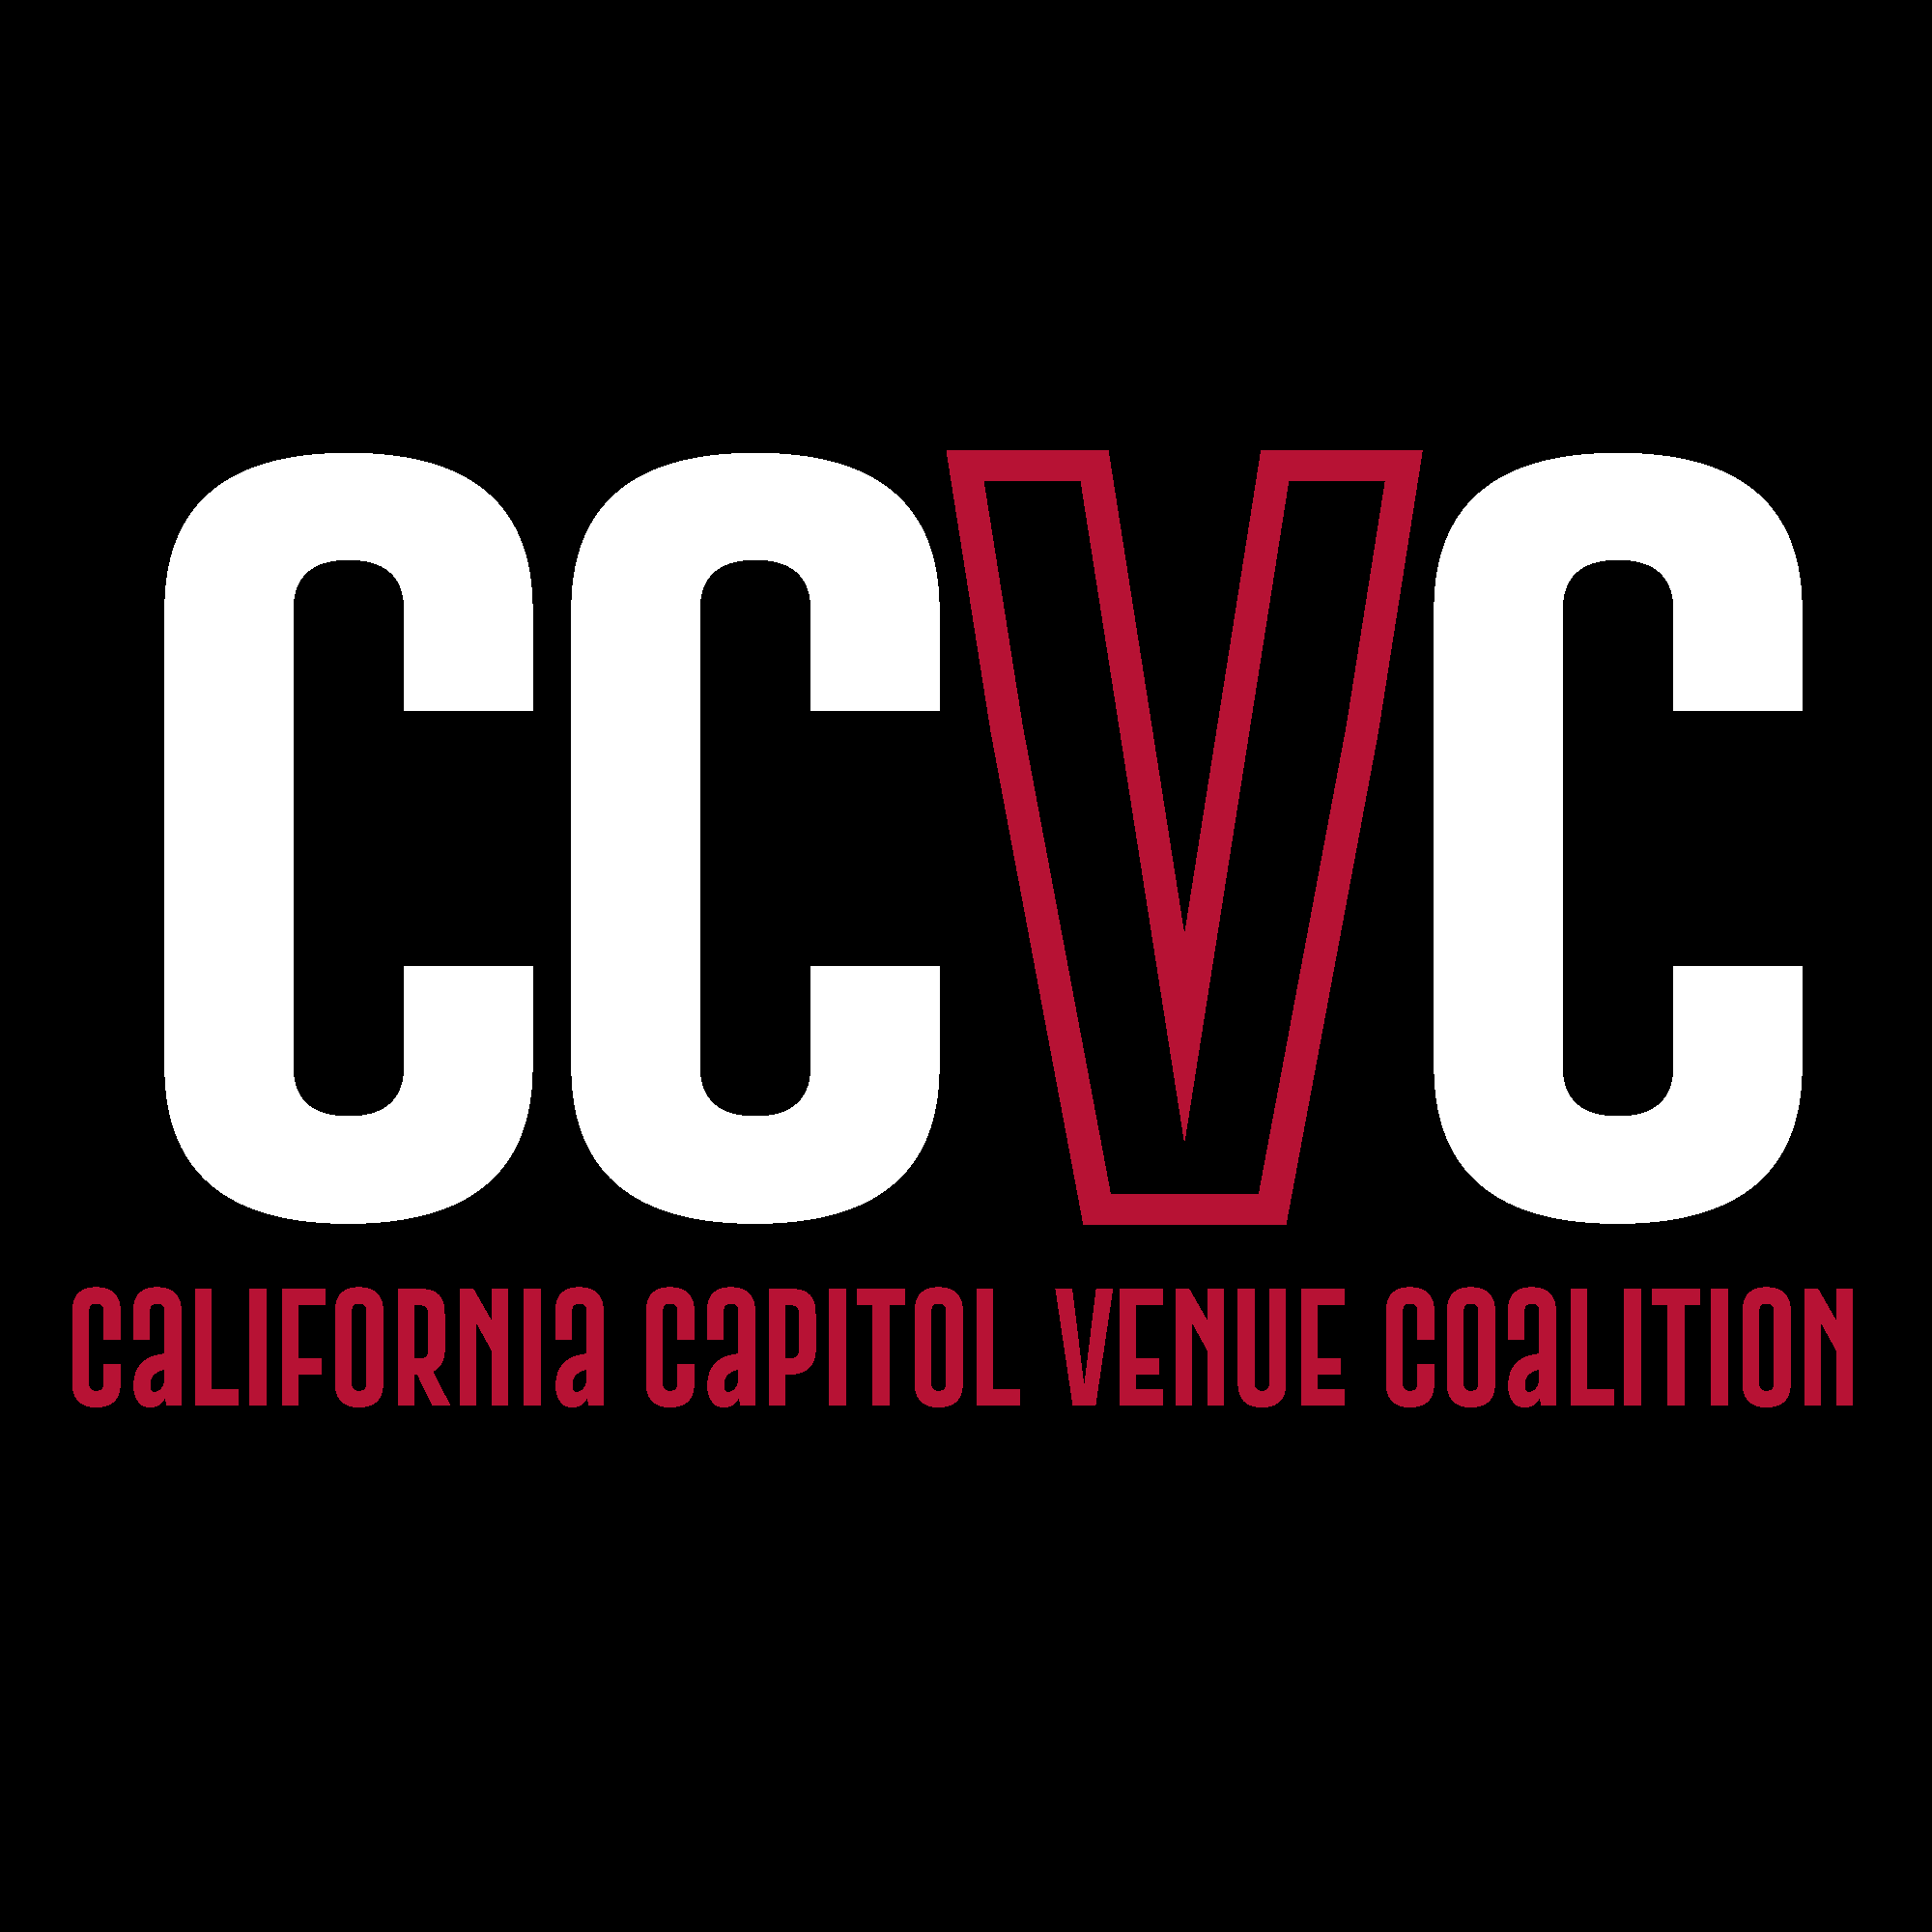 Crest Helps Found The California Capitol Venue Coalition